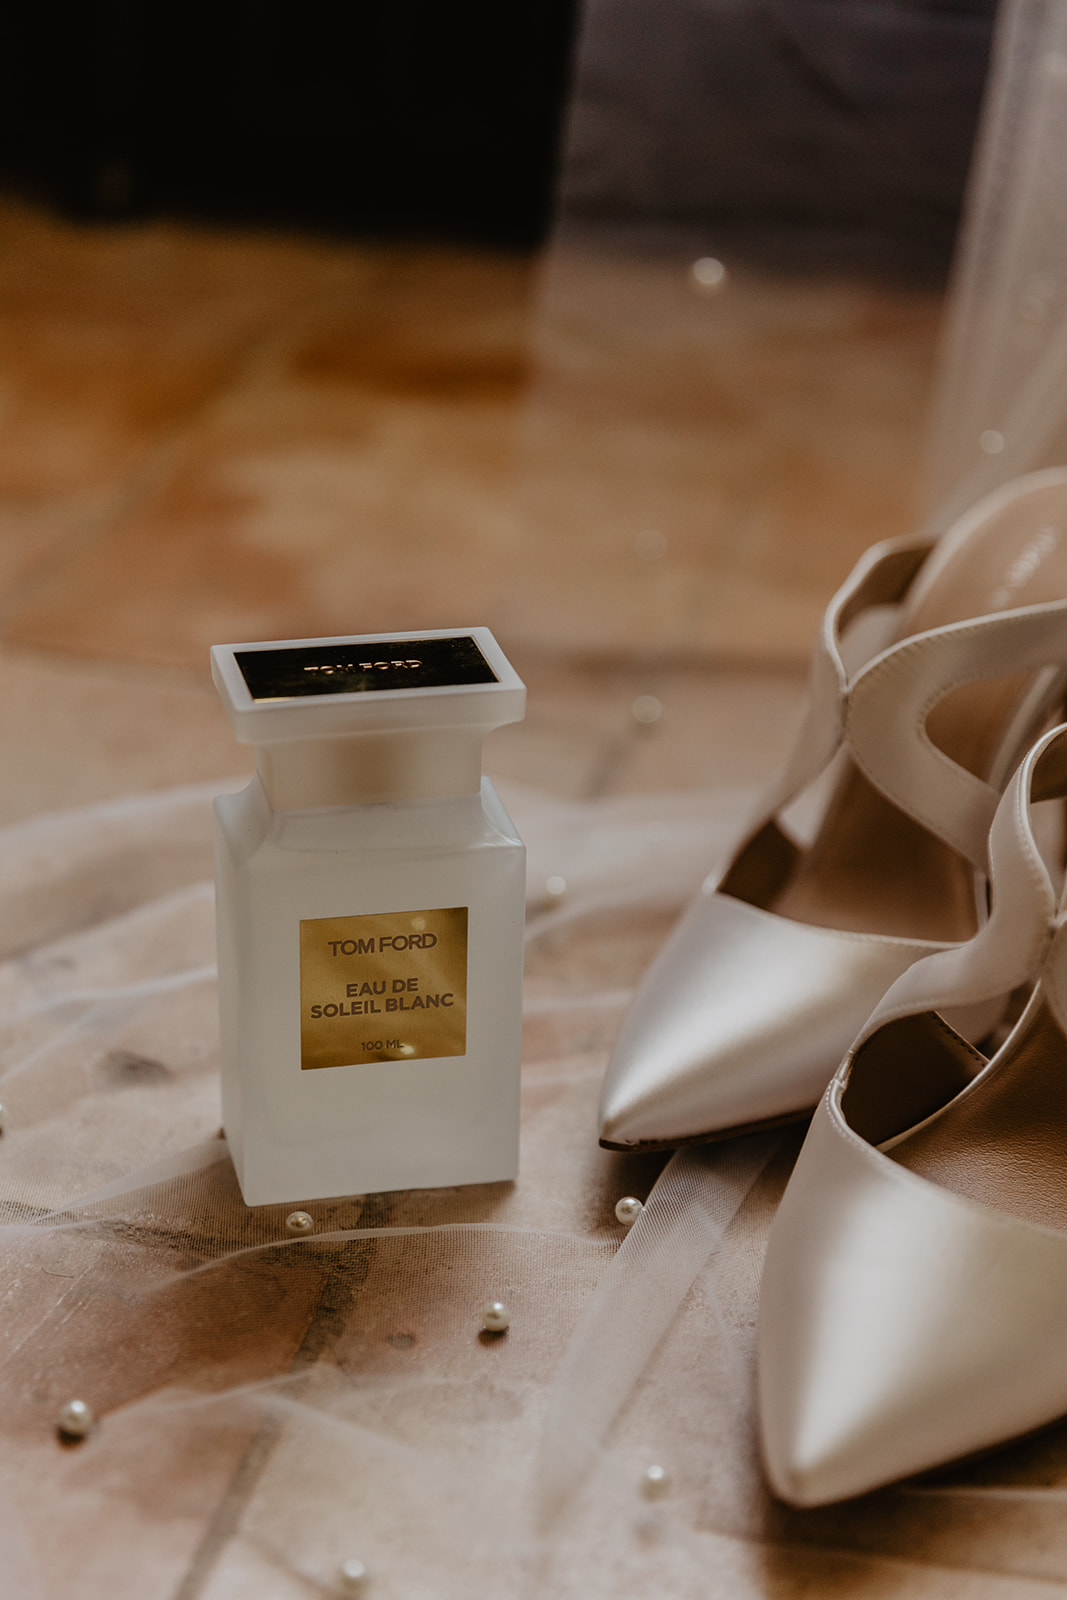 Bride shoes and perfume at a France Destination Wedding. Photography and Videography by Olive Joy Photography